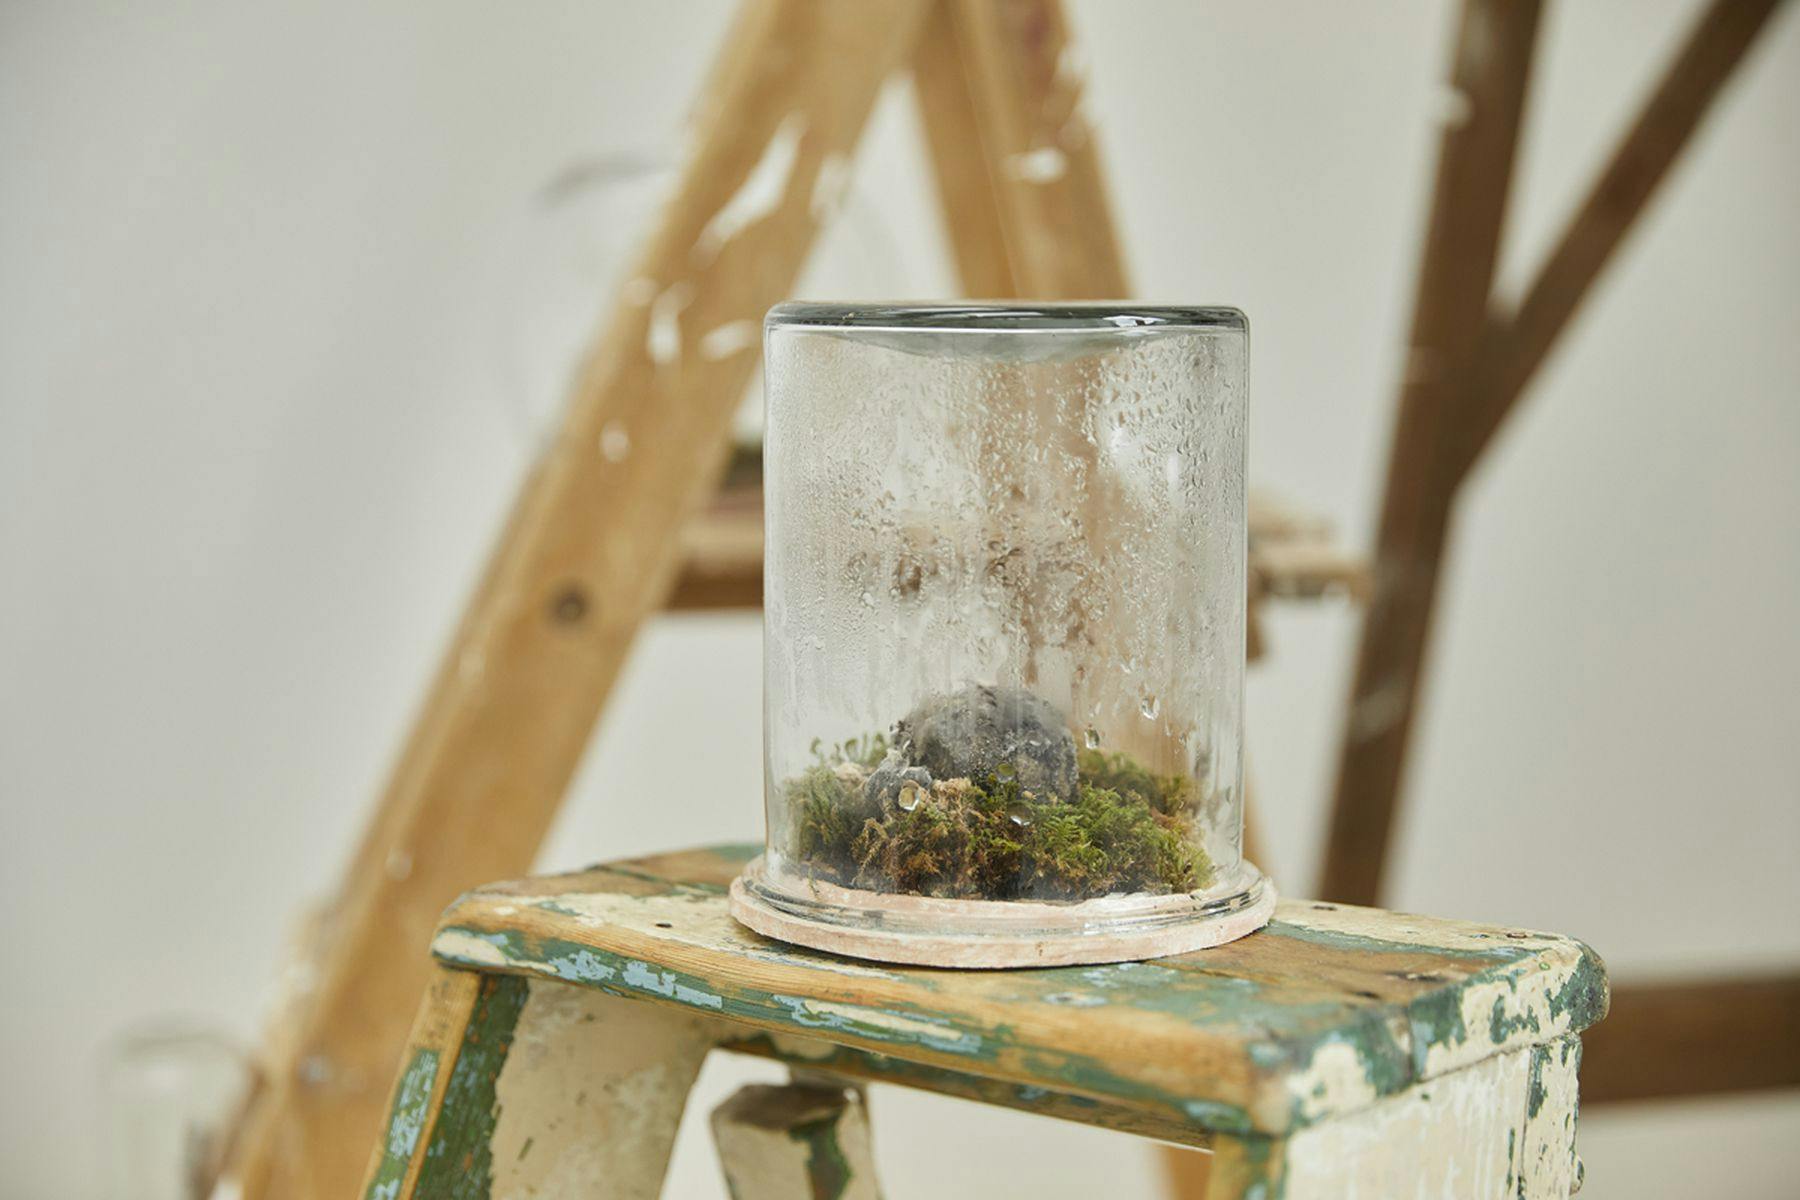 A photograph of a plant terrarium on top of a wooden stepladder. Another stepladder can be seen in the distance against a white background.